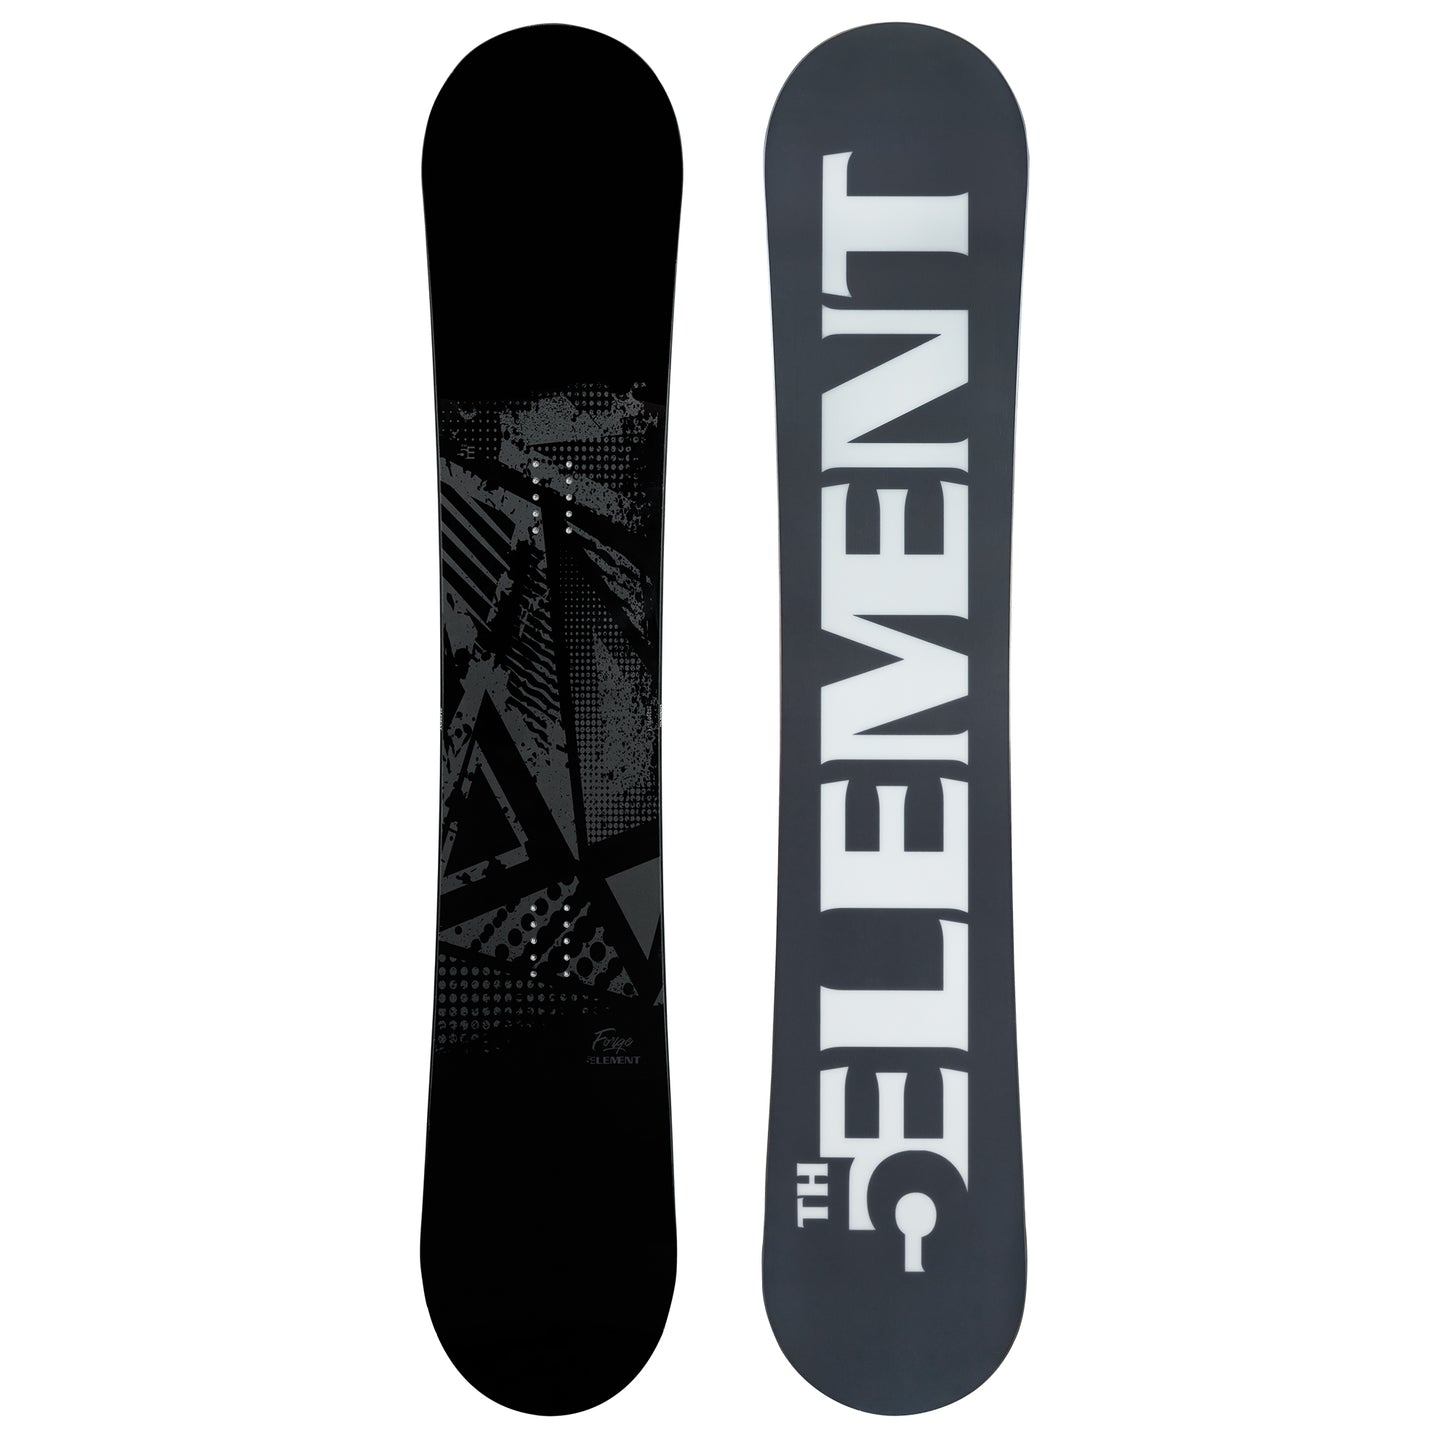 5th Element Forge ST-1 Complete Snowboard Package - Black/Red Black